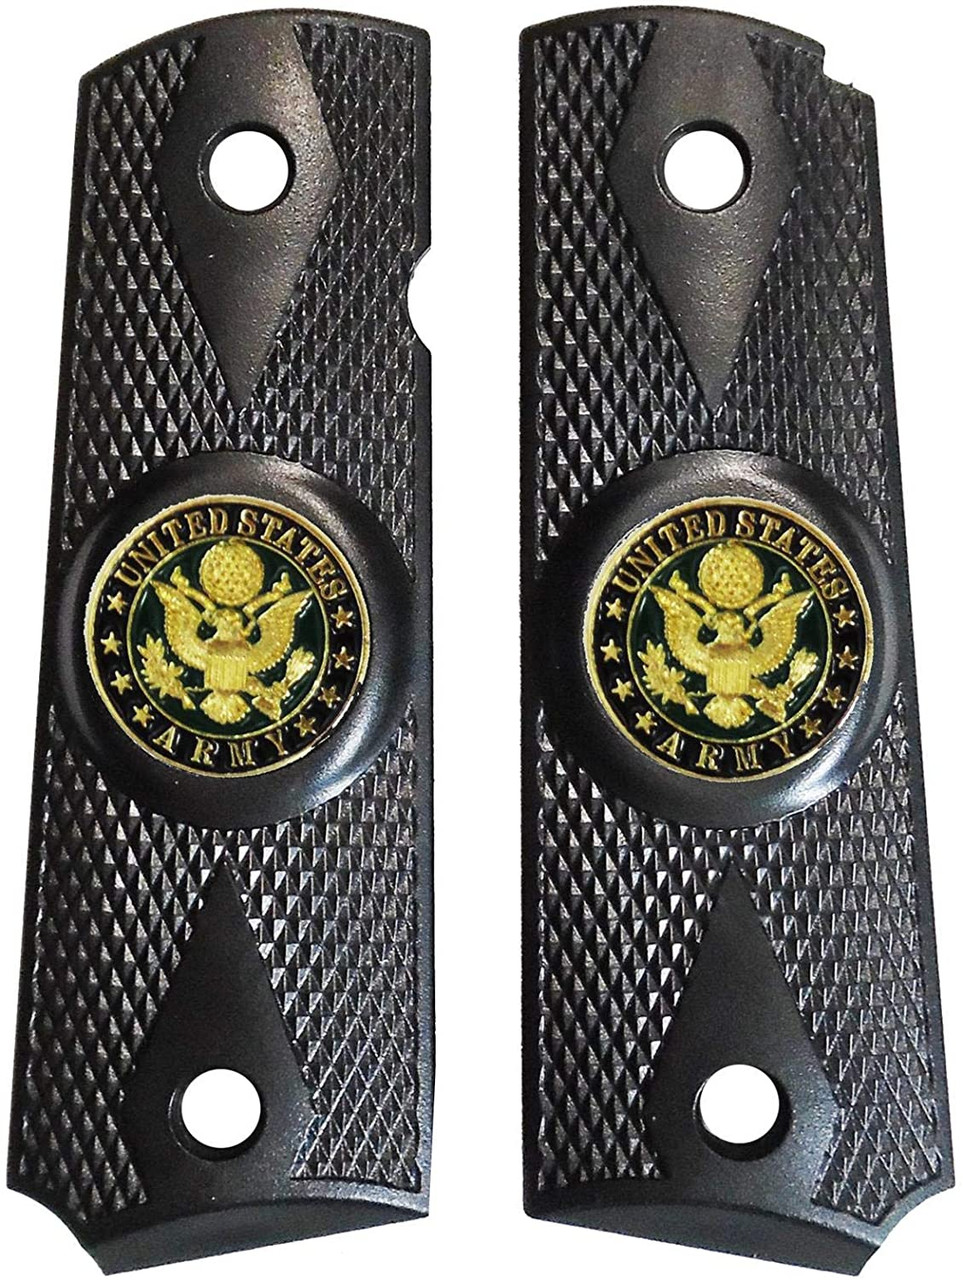 Garrison Grip 1911 Colt A1 Full Size and Clones (Grips Only) with US Army Colored Medallion Set in Double Diamond Ebony Black Colored ABS 